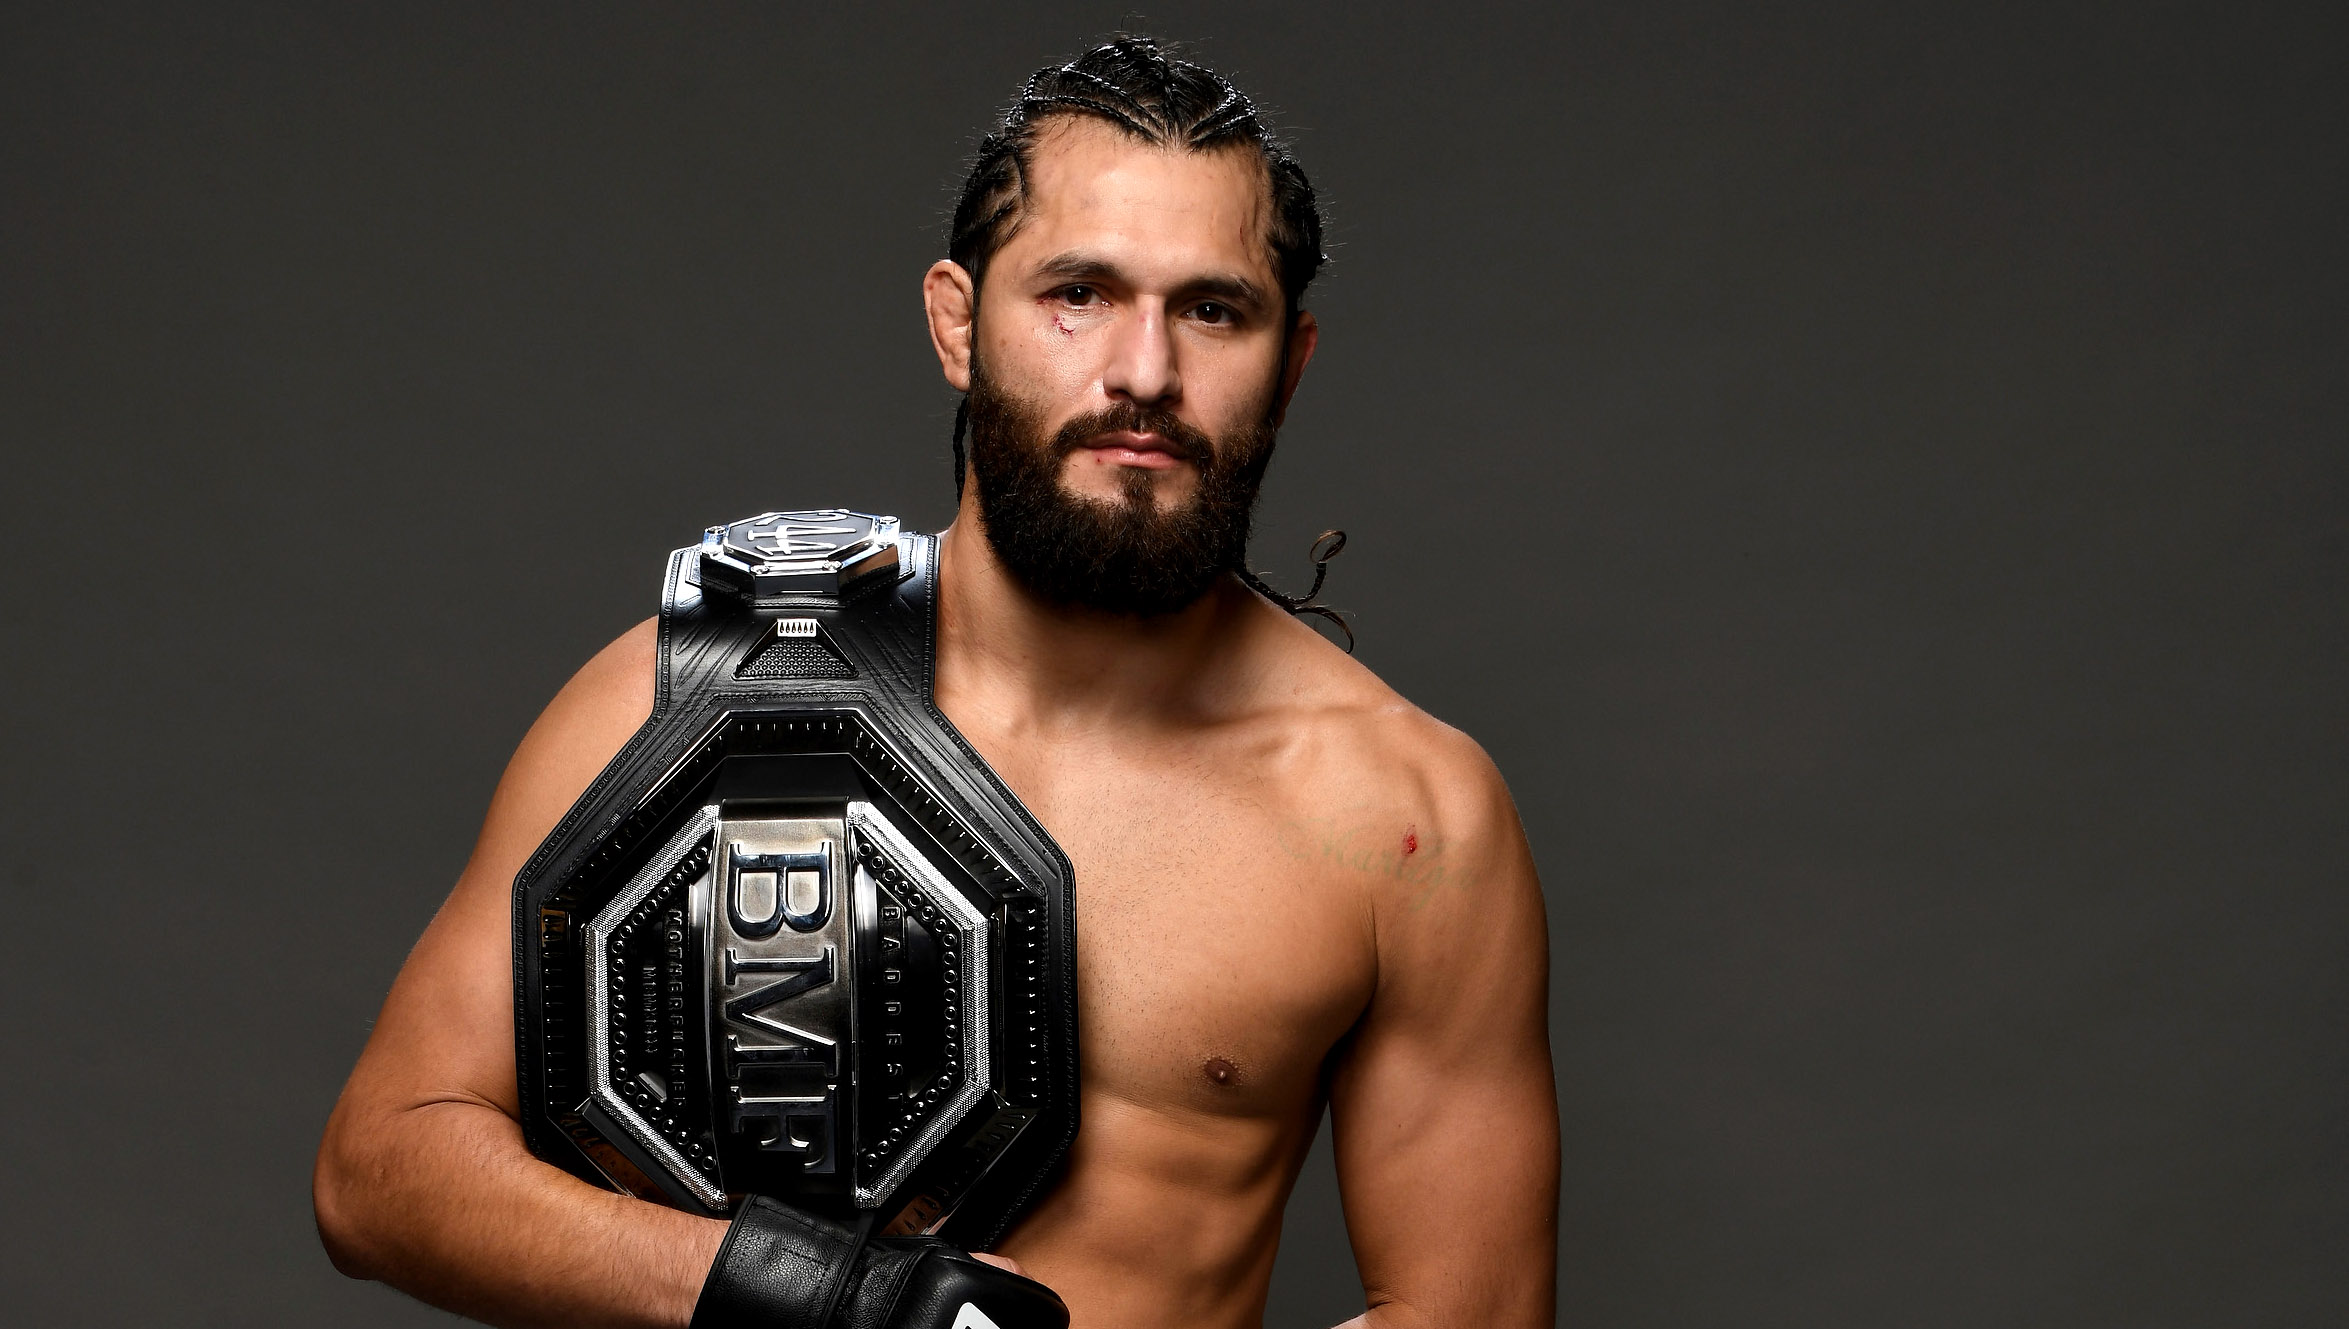 Bmf Champion Jorge Masvidal Calls Out Conor Mcgregor For Ducking Him